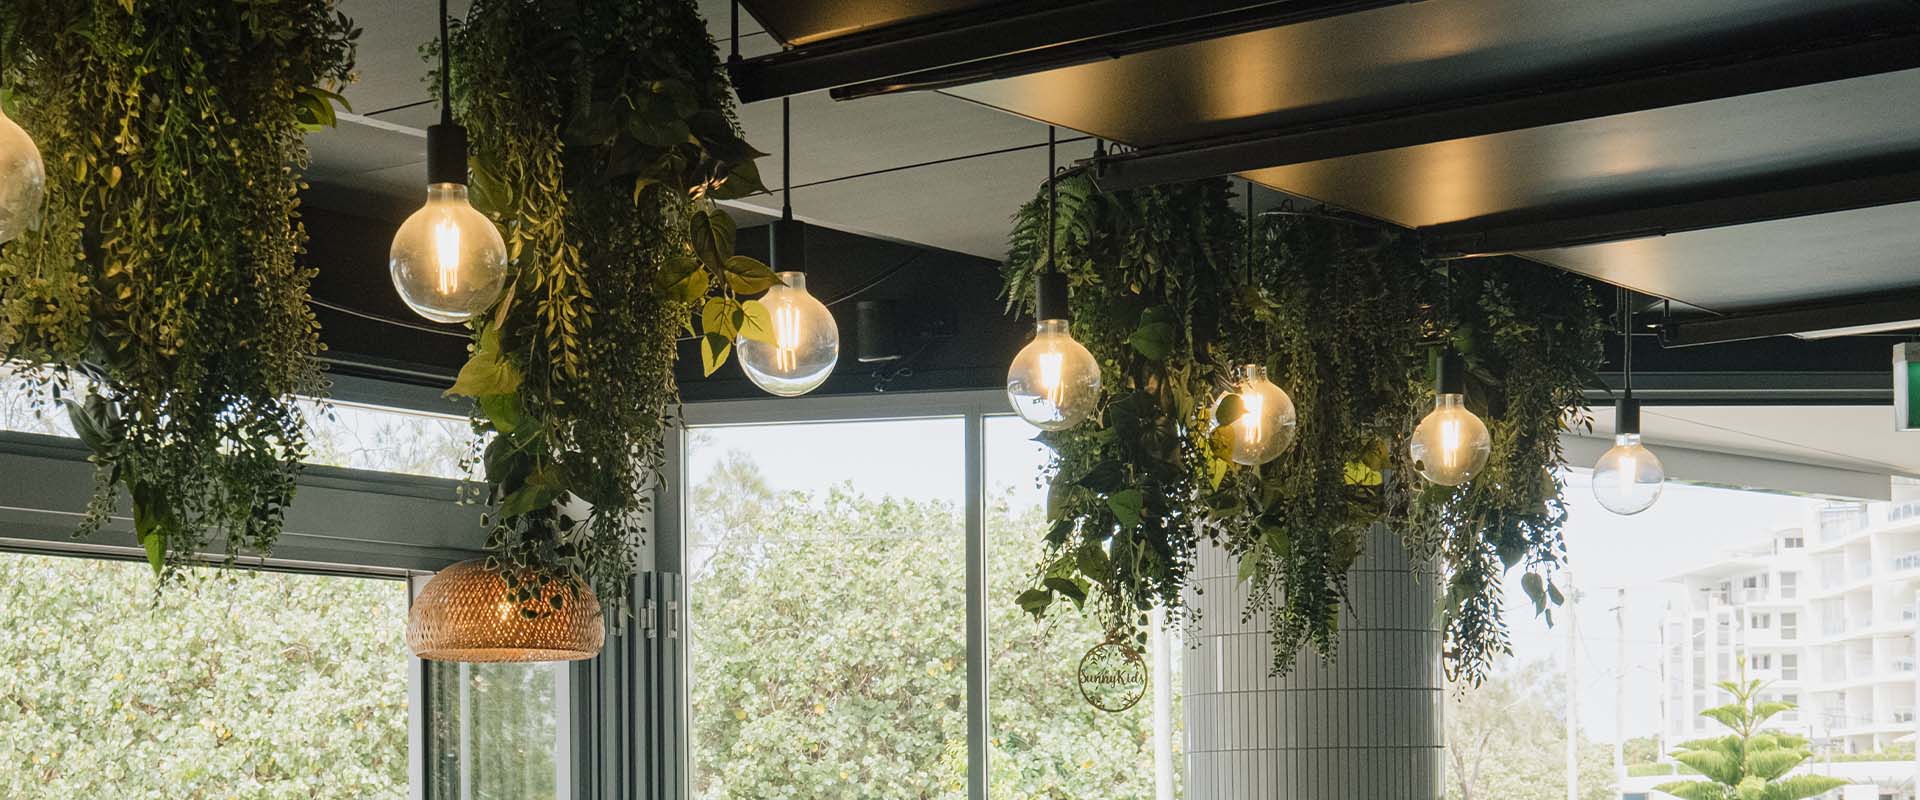 plants hanging from ceiling